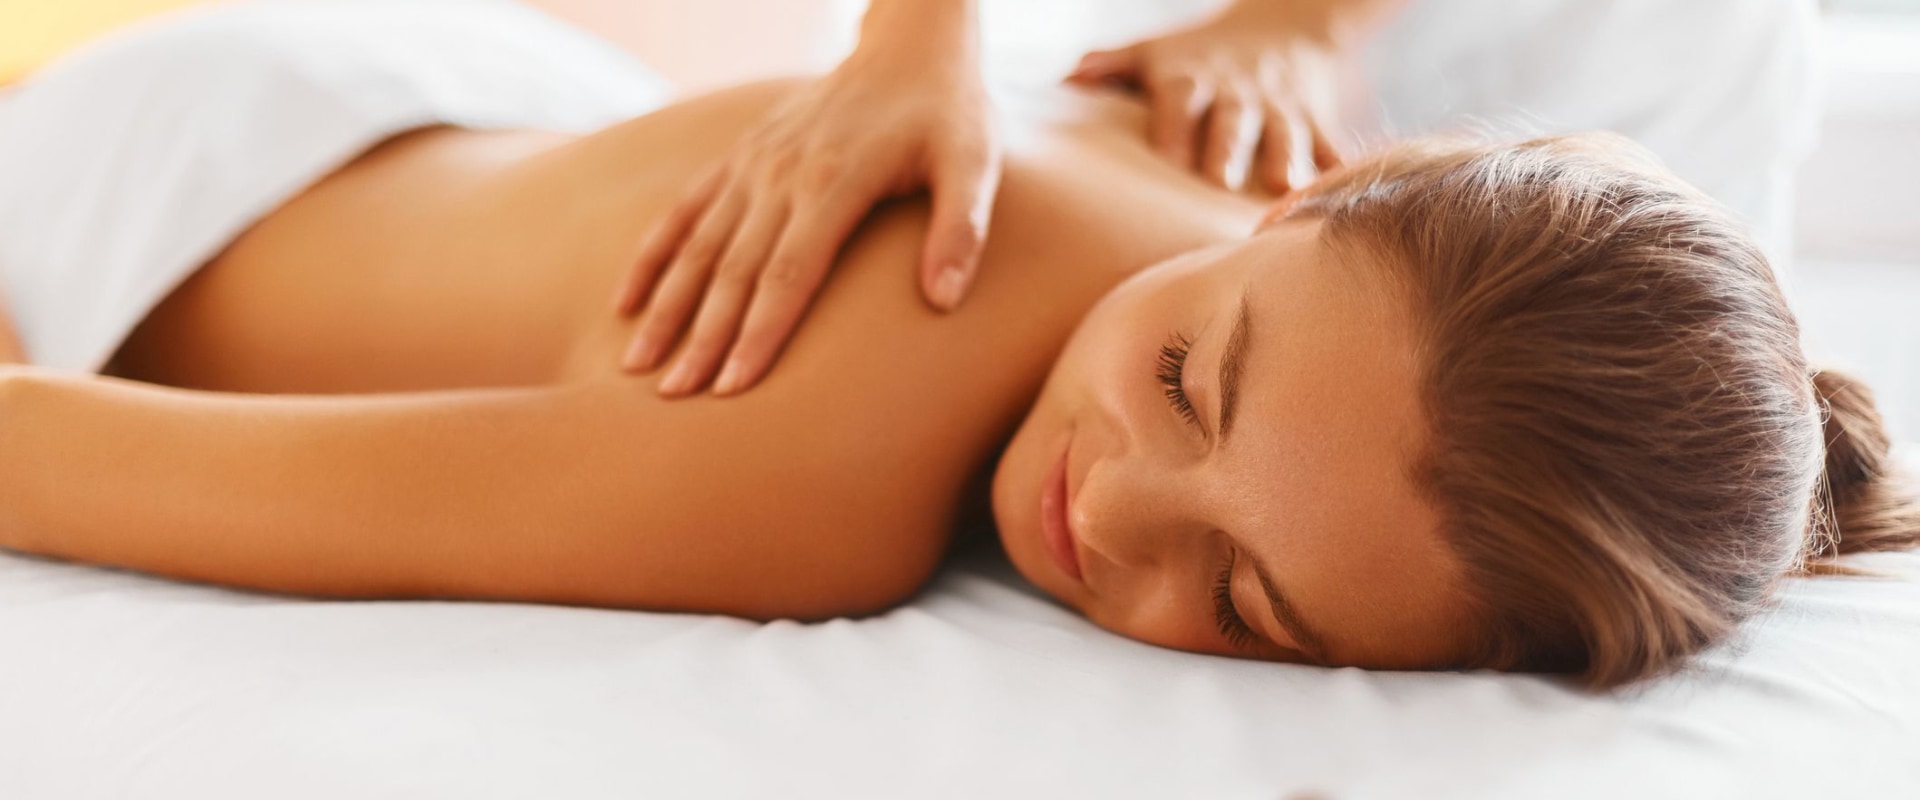 What happens during massage therapy?